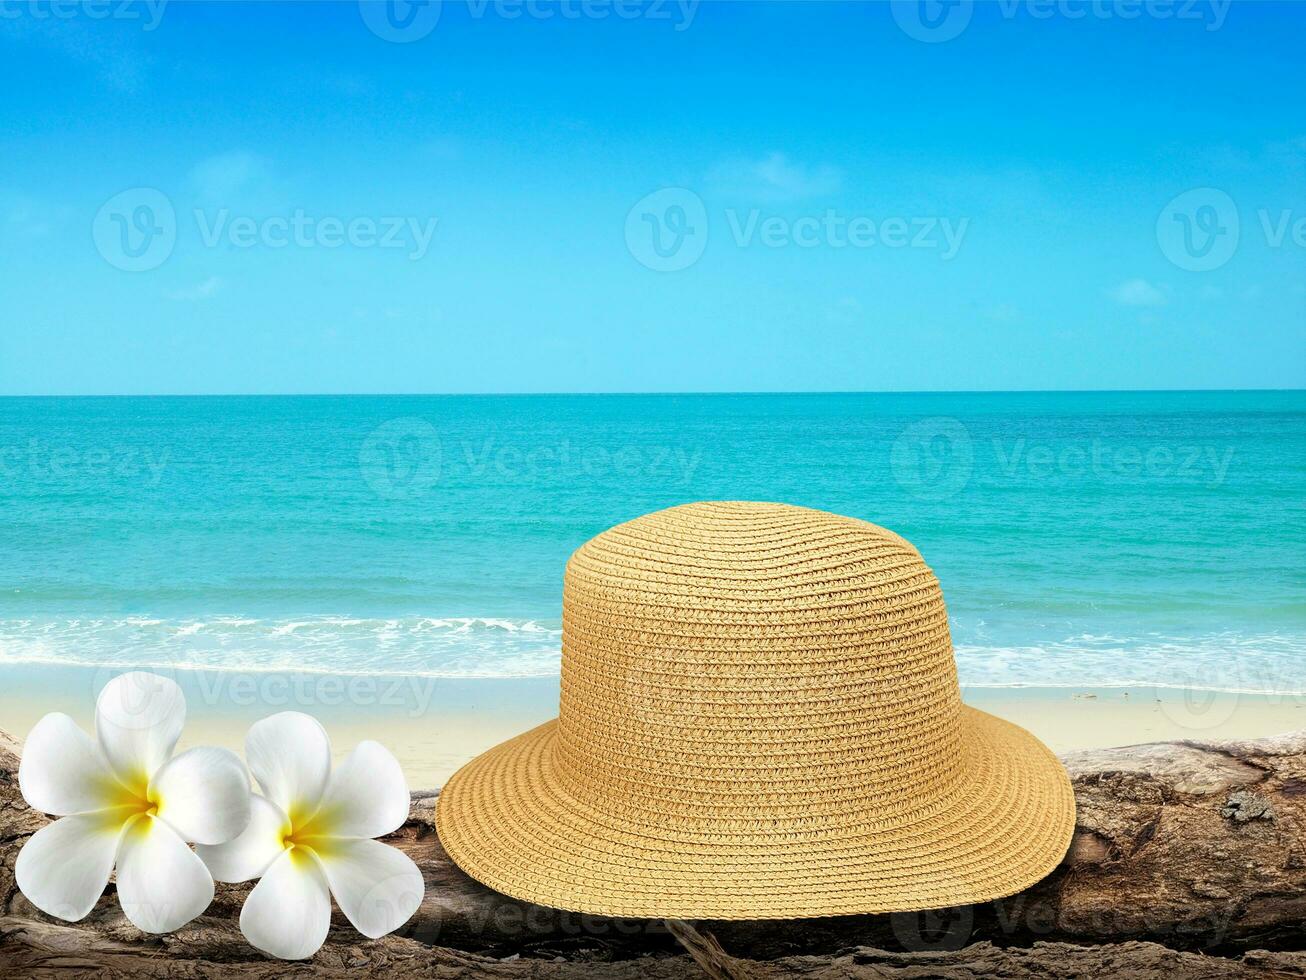 Vintage hat, wooden icon, flowers and tropical sea background. summer paradise cruise travel design tourism, beach, holiday travel destination concept photo